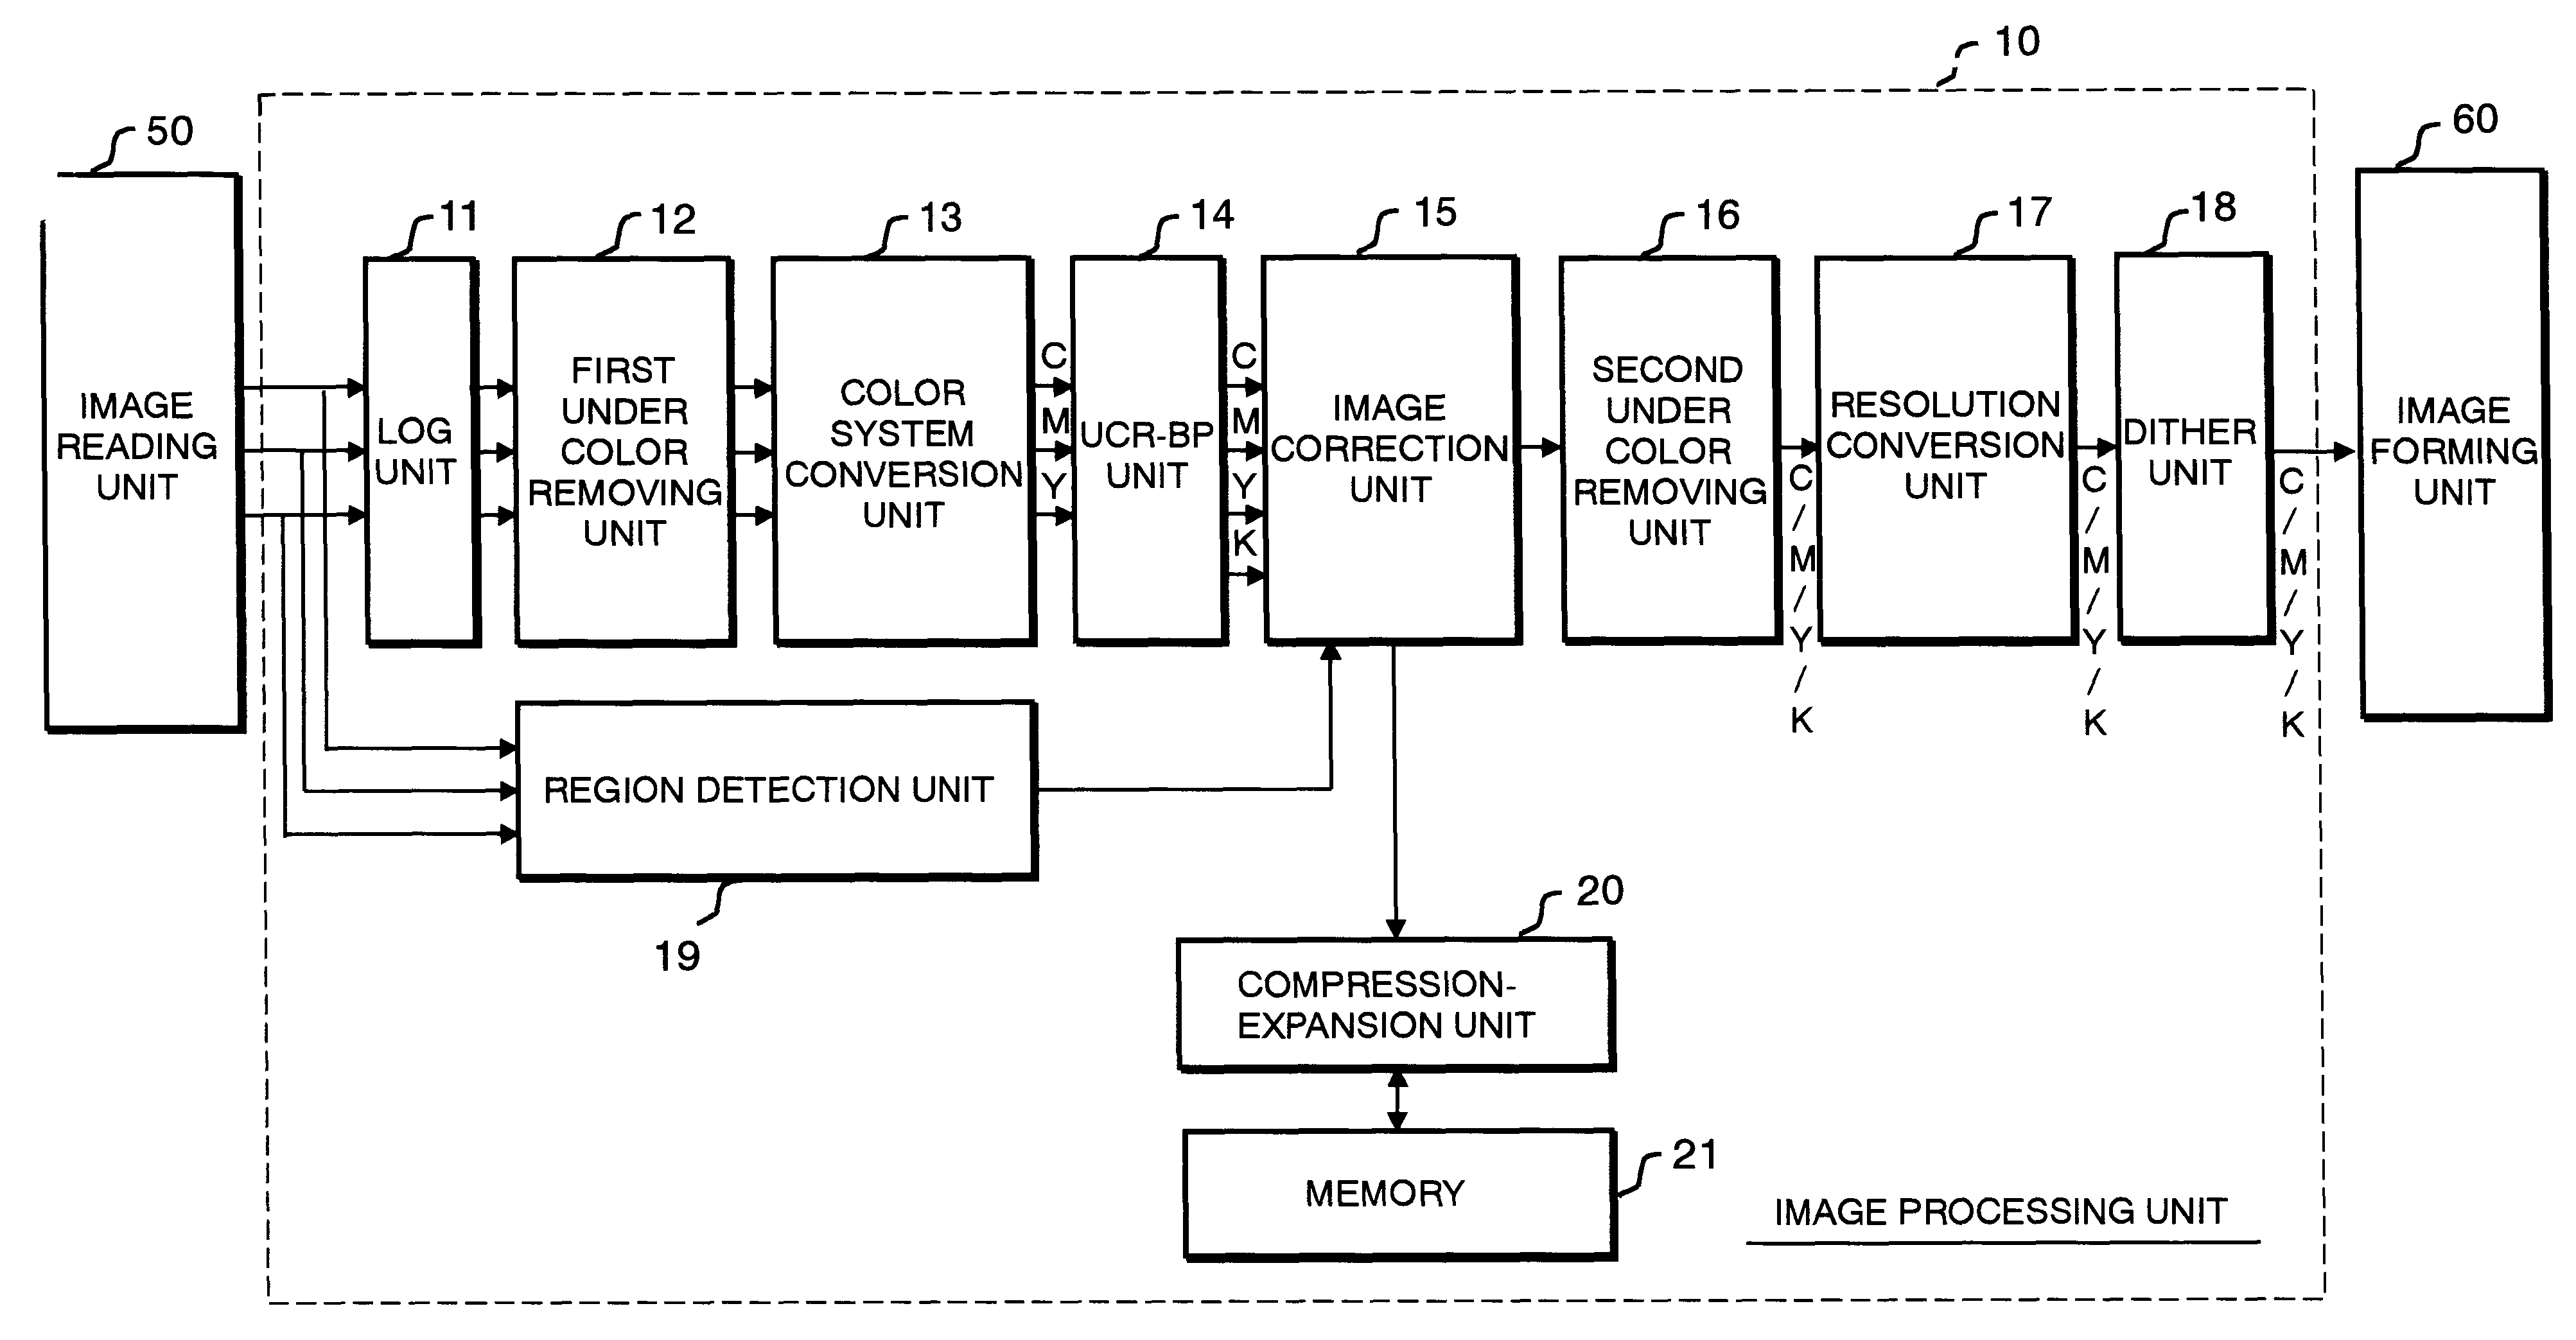 Apparatus, method, and computer program product for noise reduction image processing